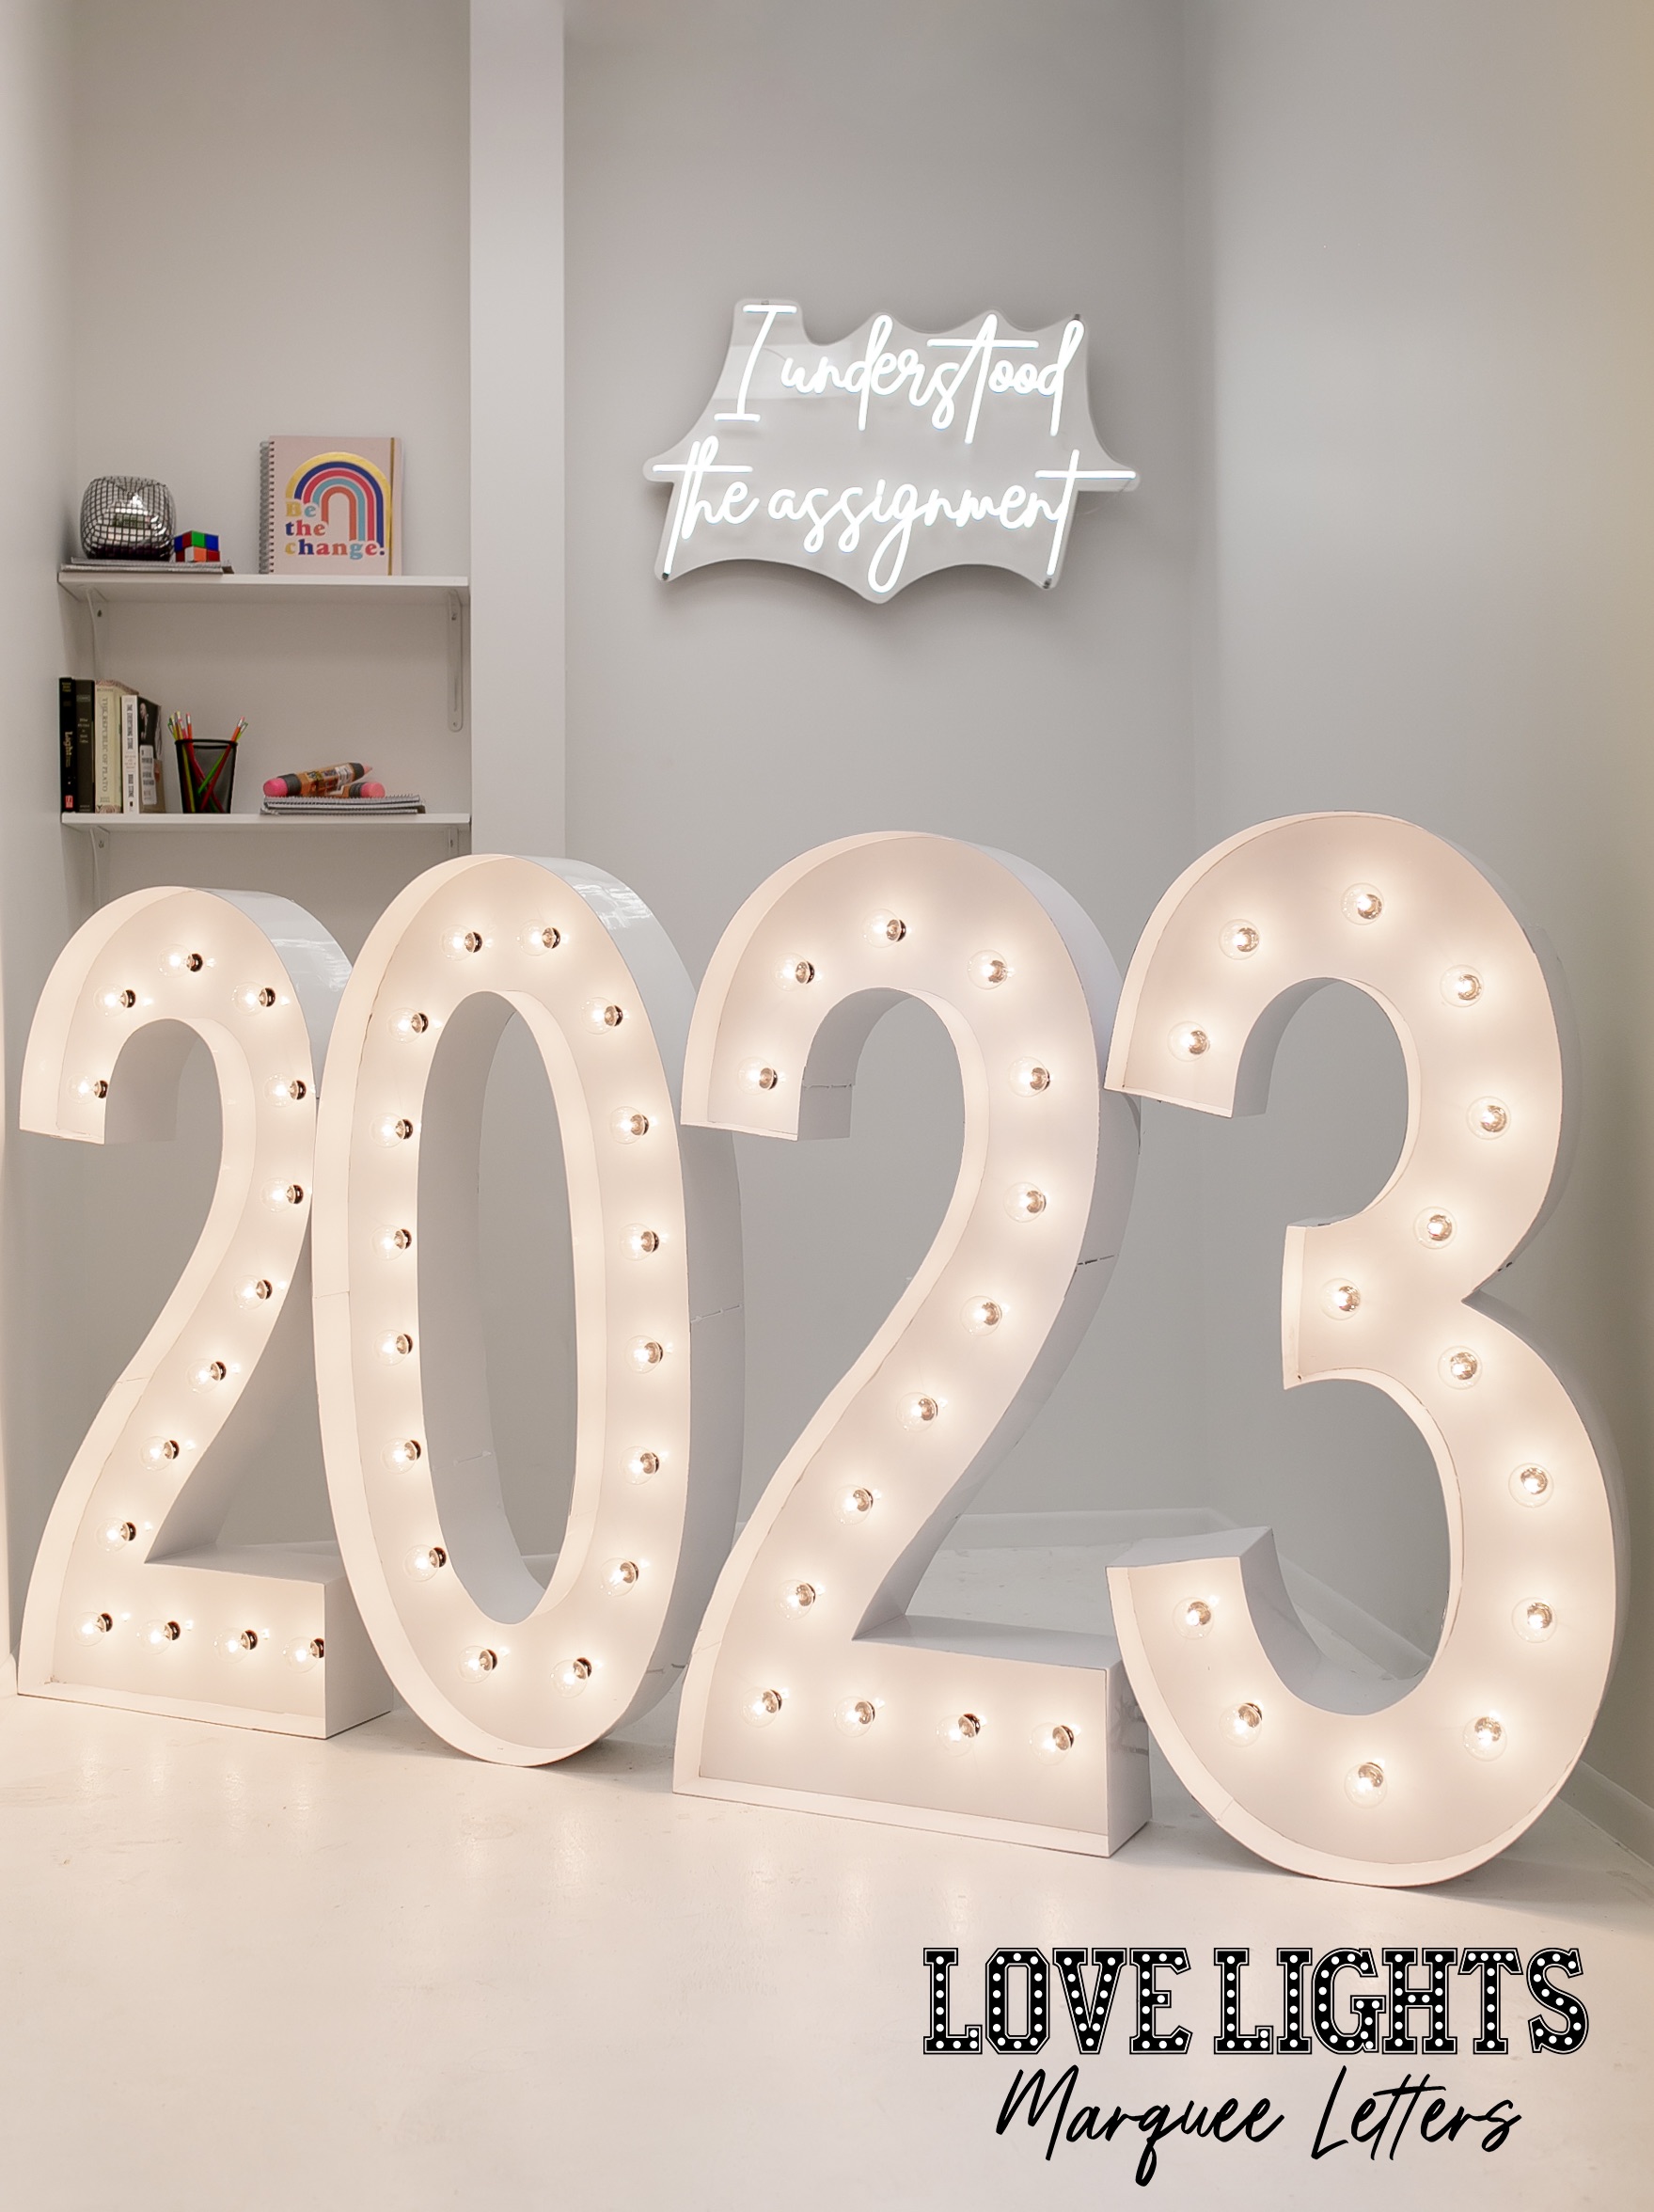 2023 in lit marquee letters in a white room with LED light saying I understood the assignment